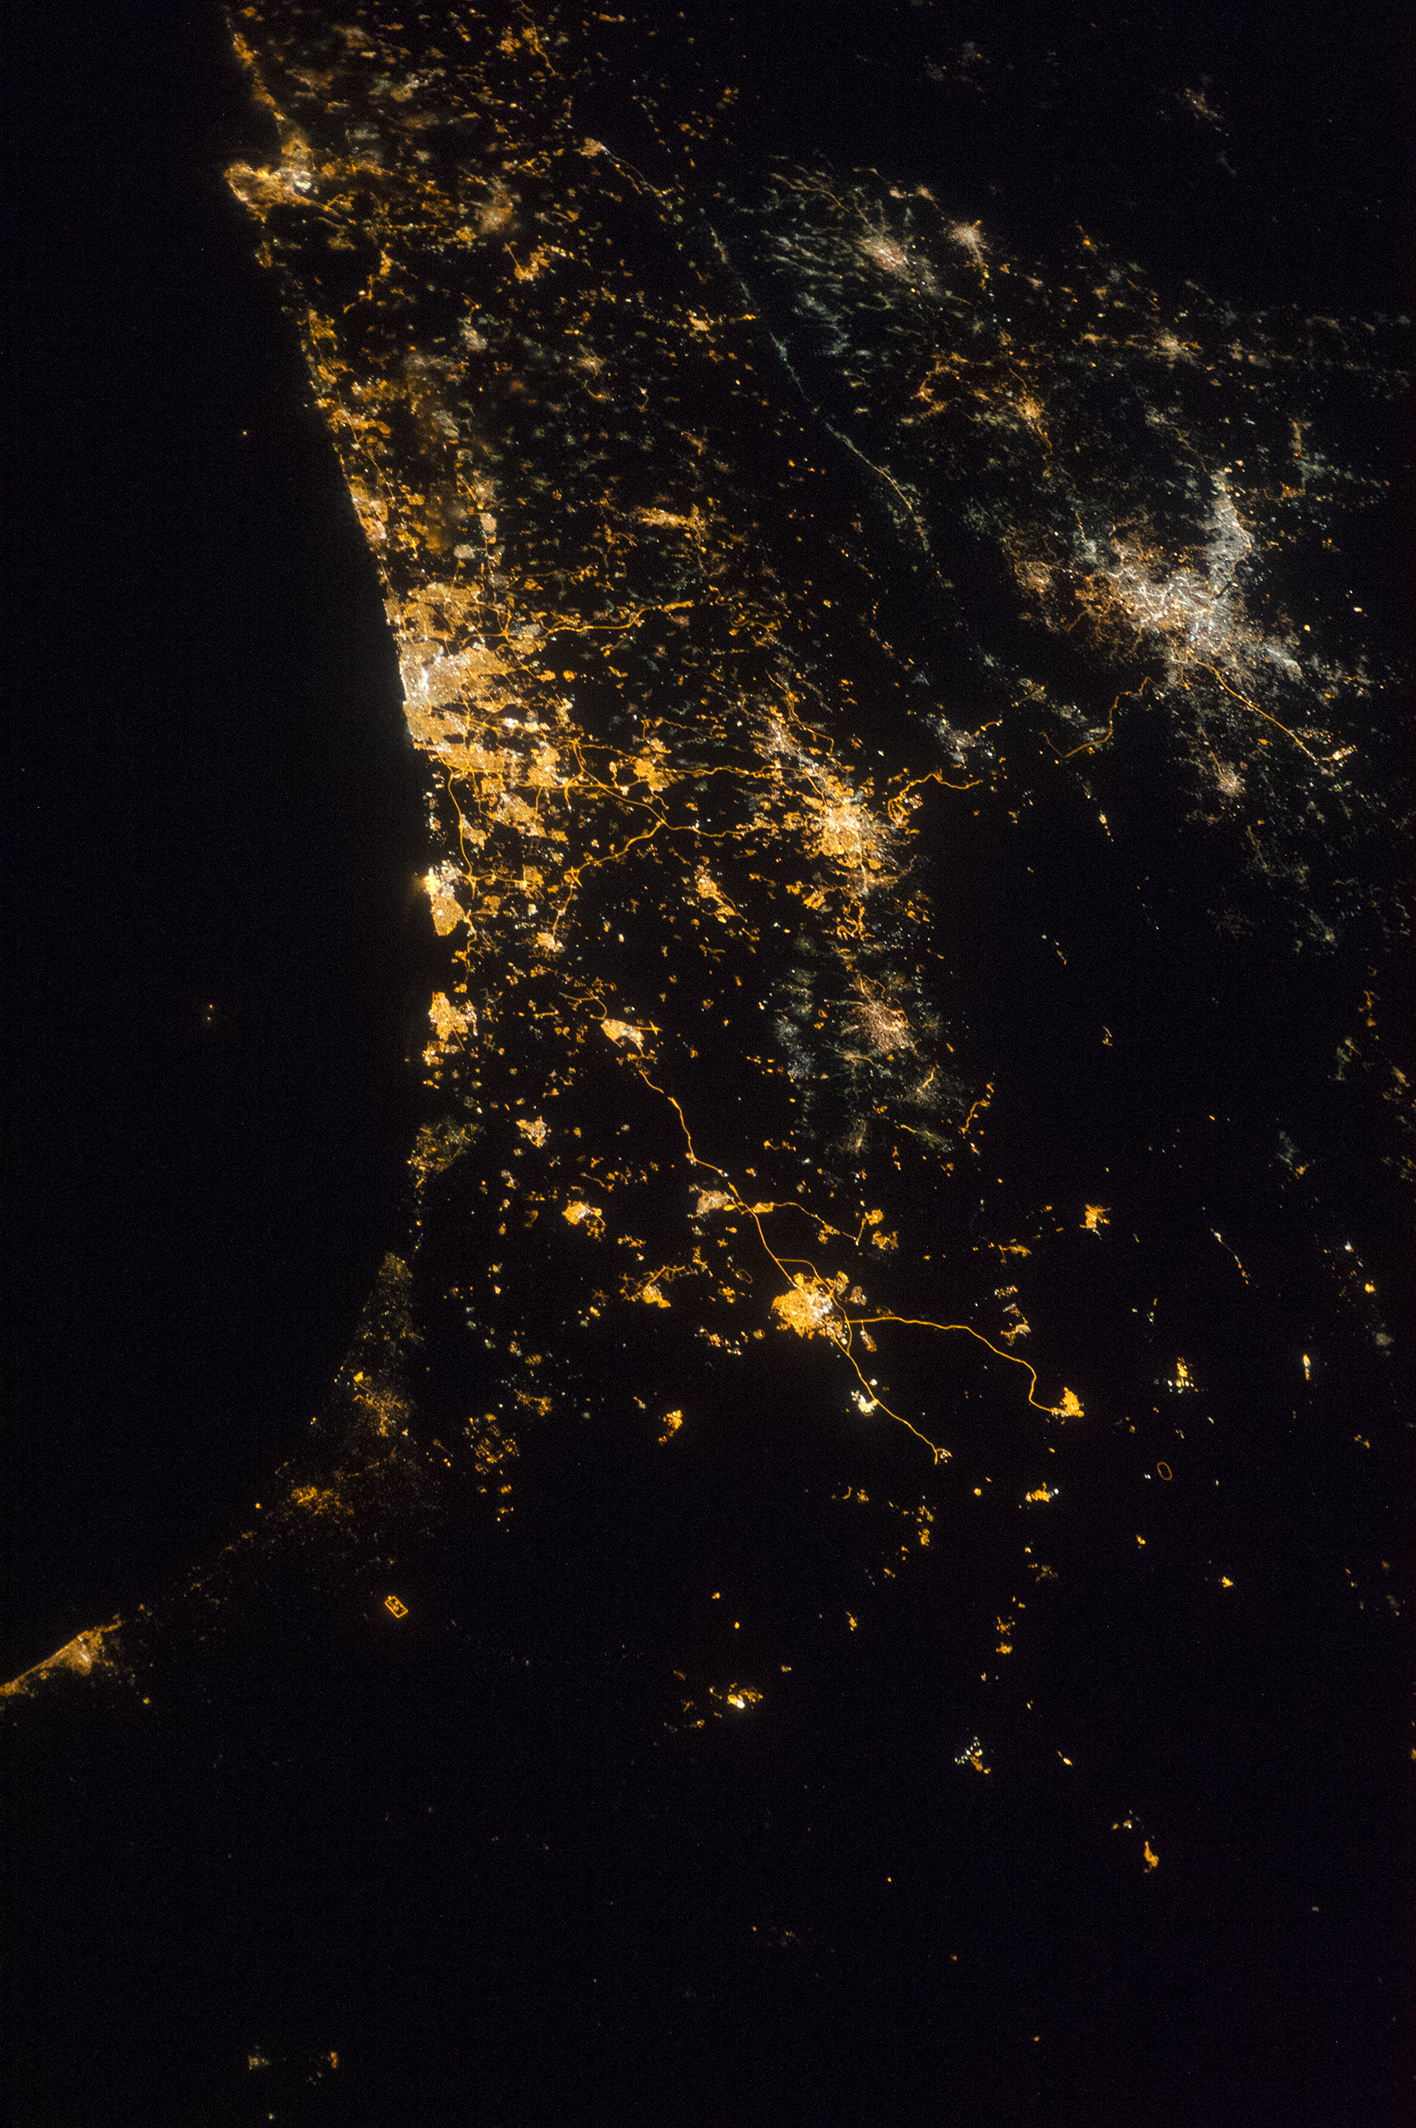 Eastern Mediterranean Coastline at Night - related image preview